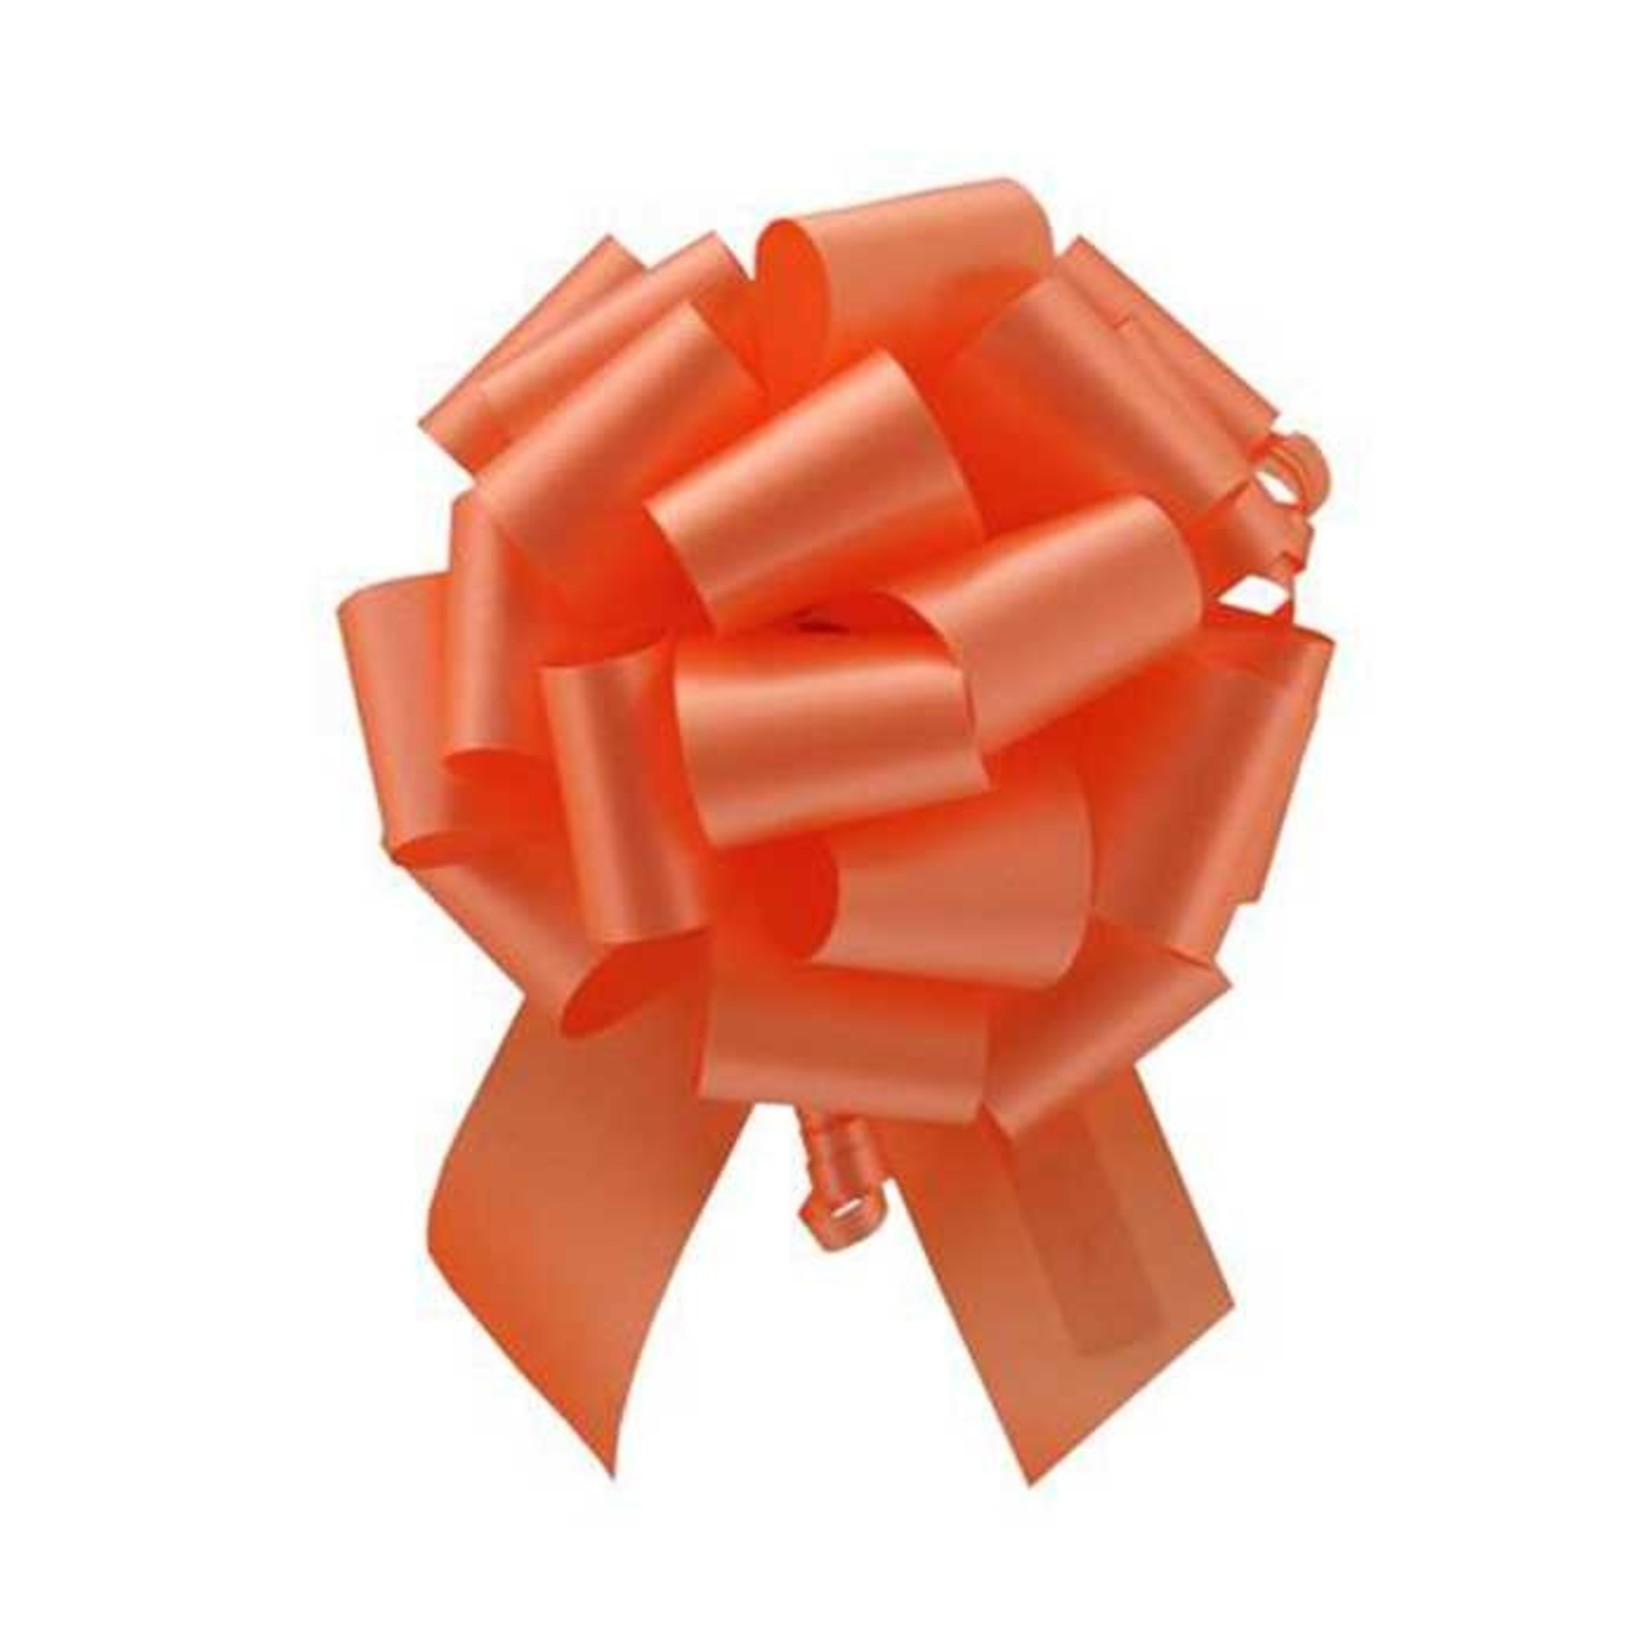 PERFECT BOW ORANGE #5, 7/8" ribbon width, 4" bow size, 18 loops